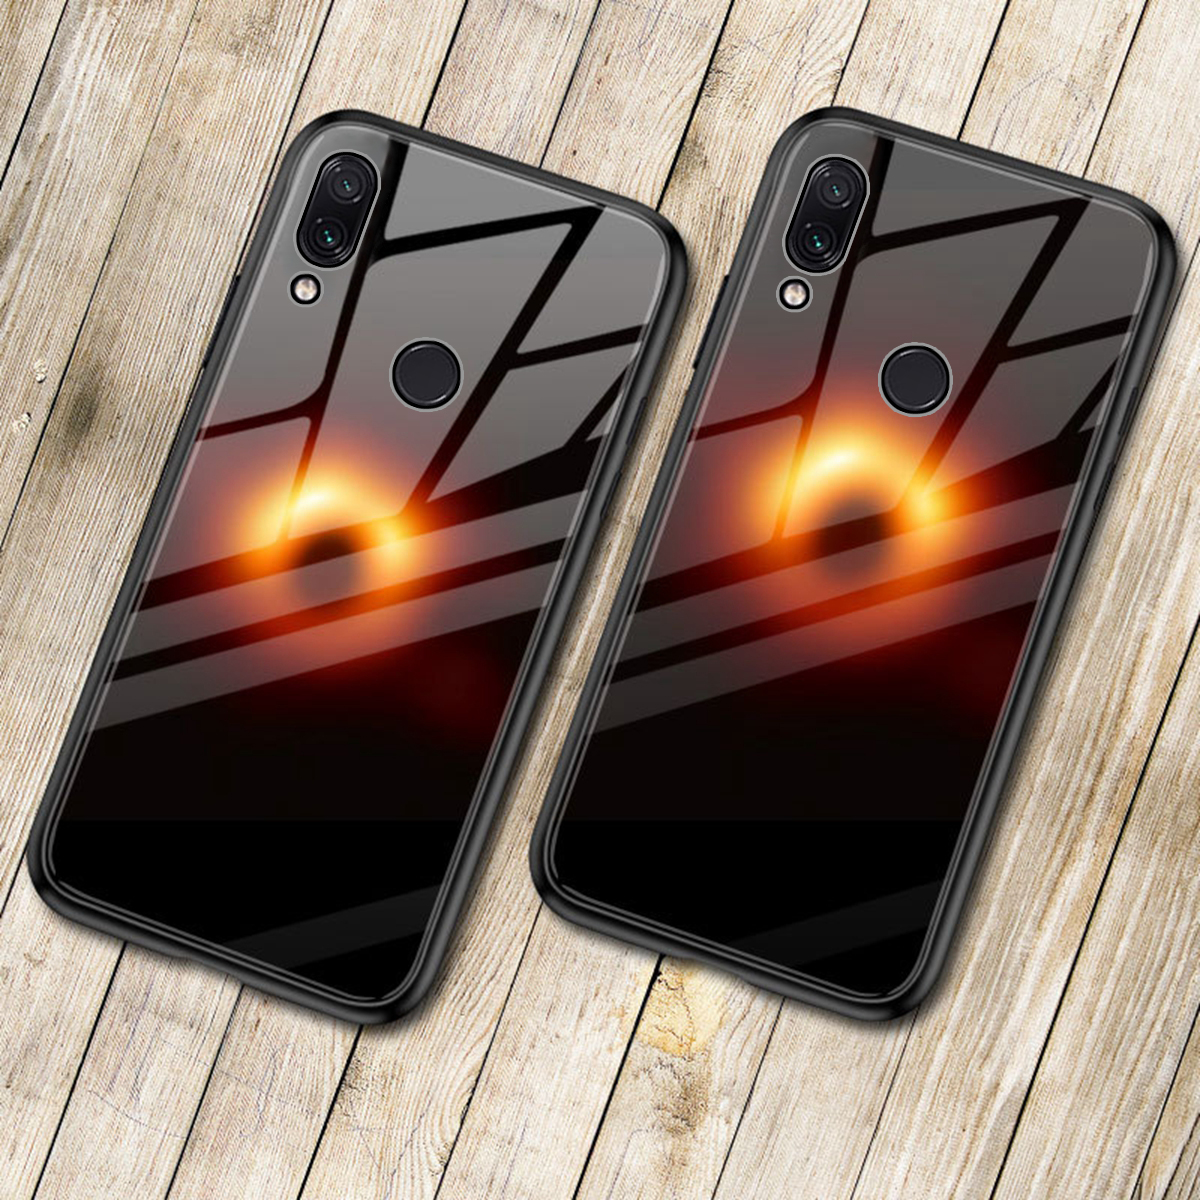 Bakeey-Black-Holes-Collapsar-Hard-Tempered-GlassampSoft-TPU-Protective-Case-For-Huawei-Honor-8X-1460254